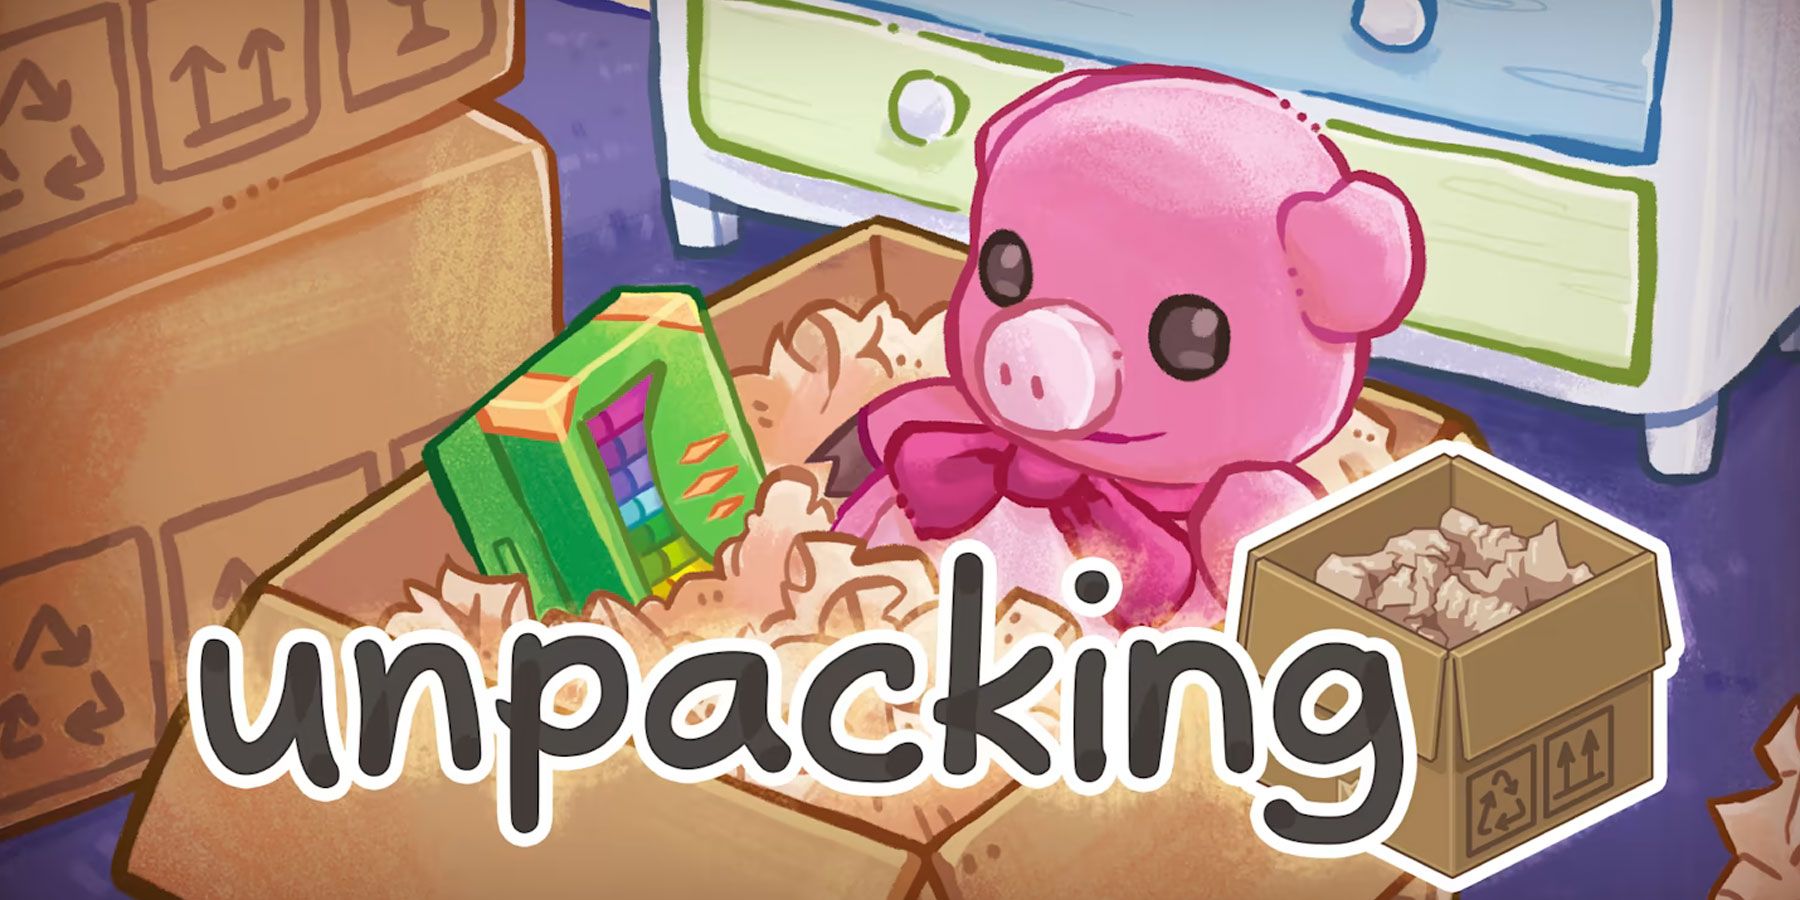 unpacking-video-game-stuffed-pig-toy-in-open-box